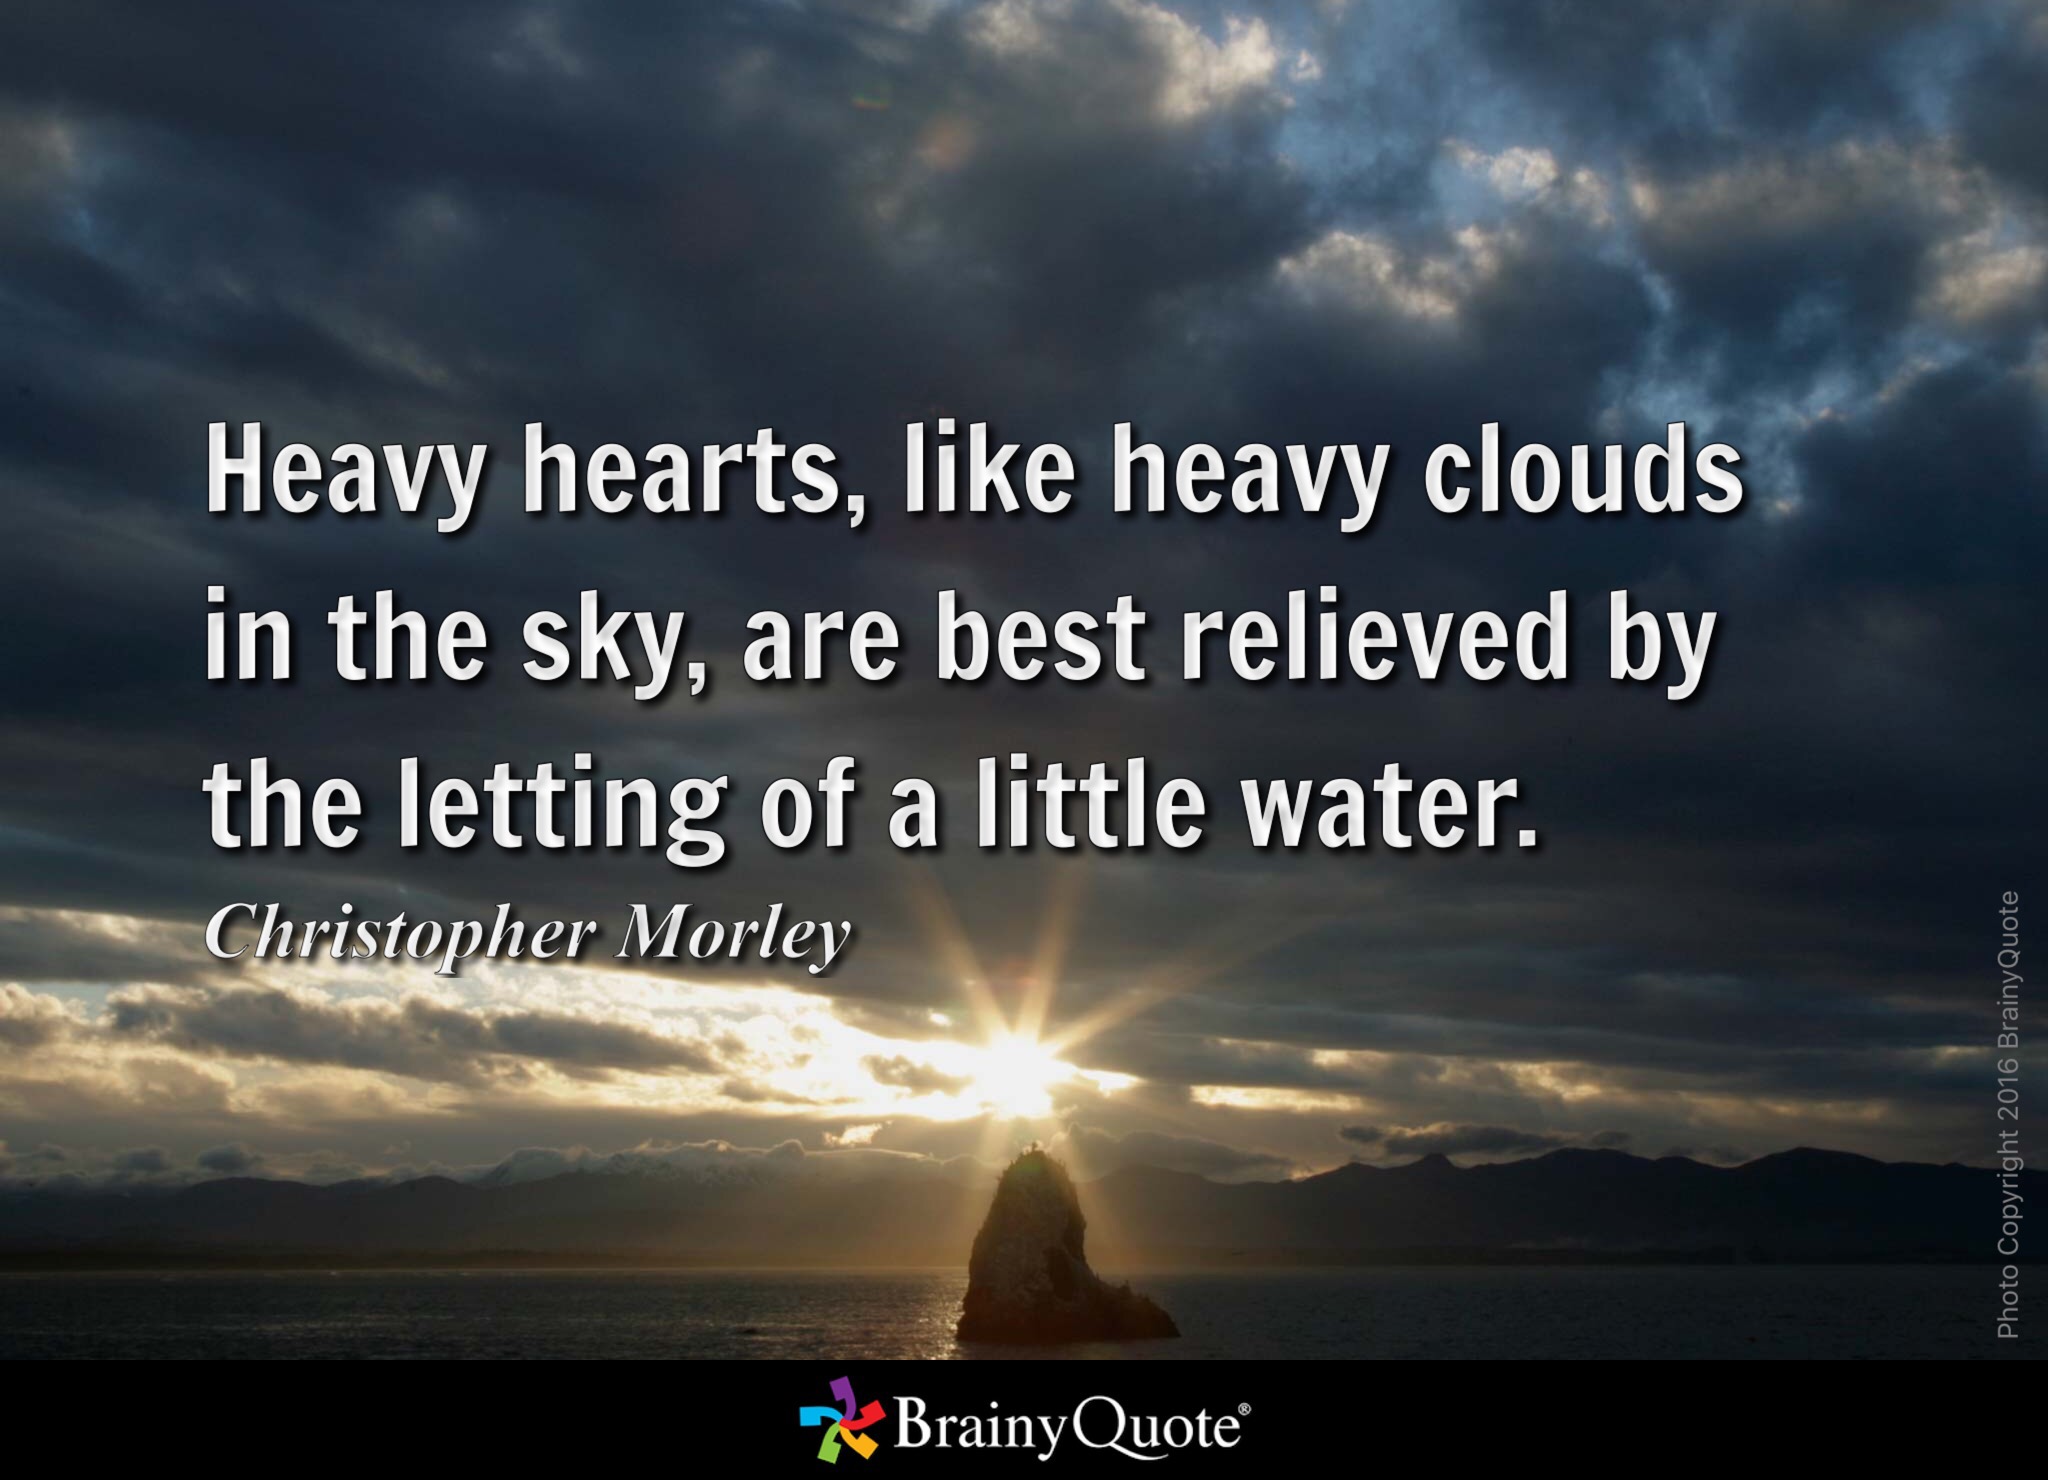 Heavy hearts, like heavy clouds in the sky, are best relieved by the letting of a little water. - Christopher Morley from BrainyQuote.com 